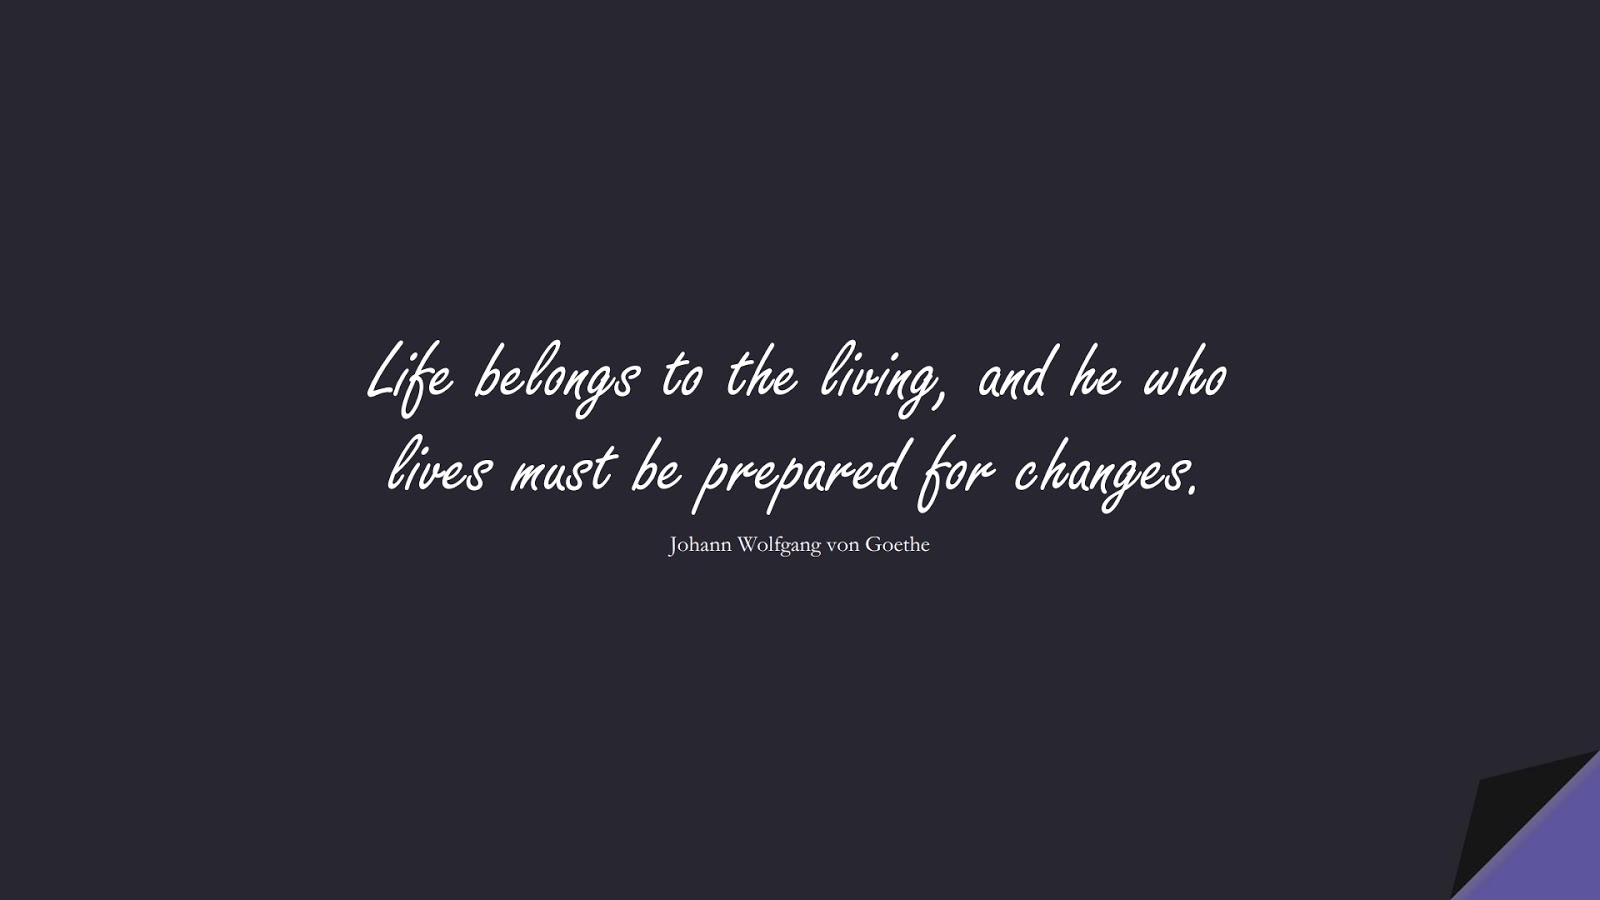 Life belongs to the living, and he who lives must be prepared for changes. (Johann Wolfgang von Goethe);  #ShortQuotes